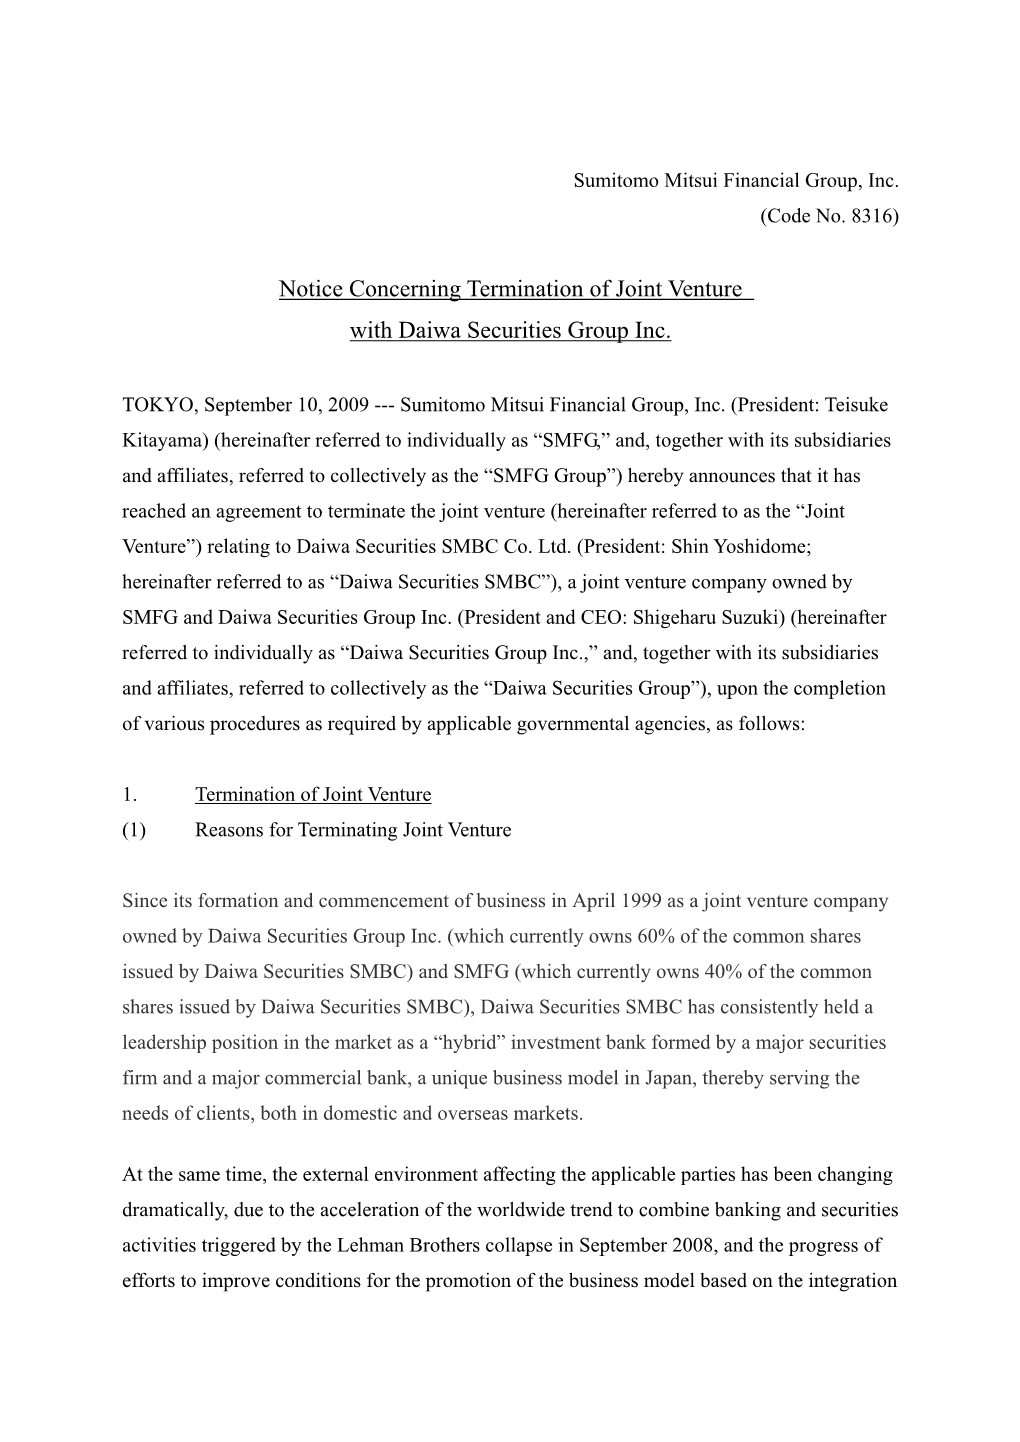 Notice Concerning Termination of Joint Venture with Daiwa Securities Group Inc